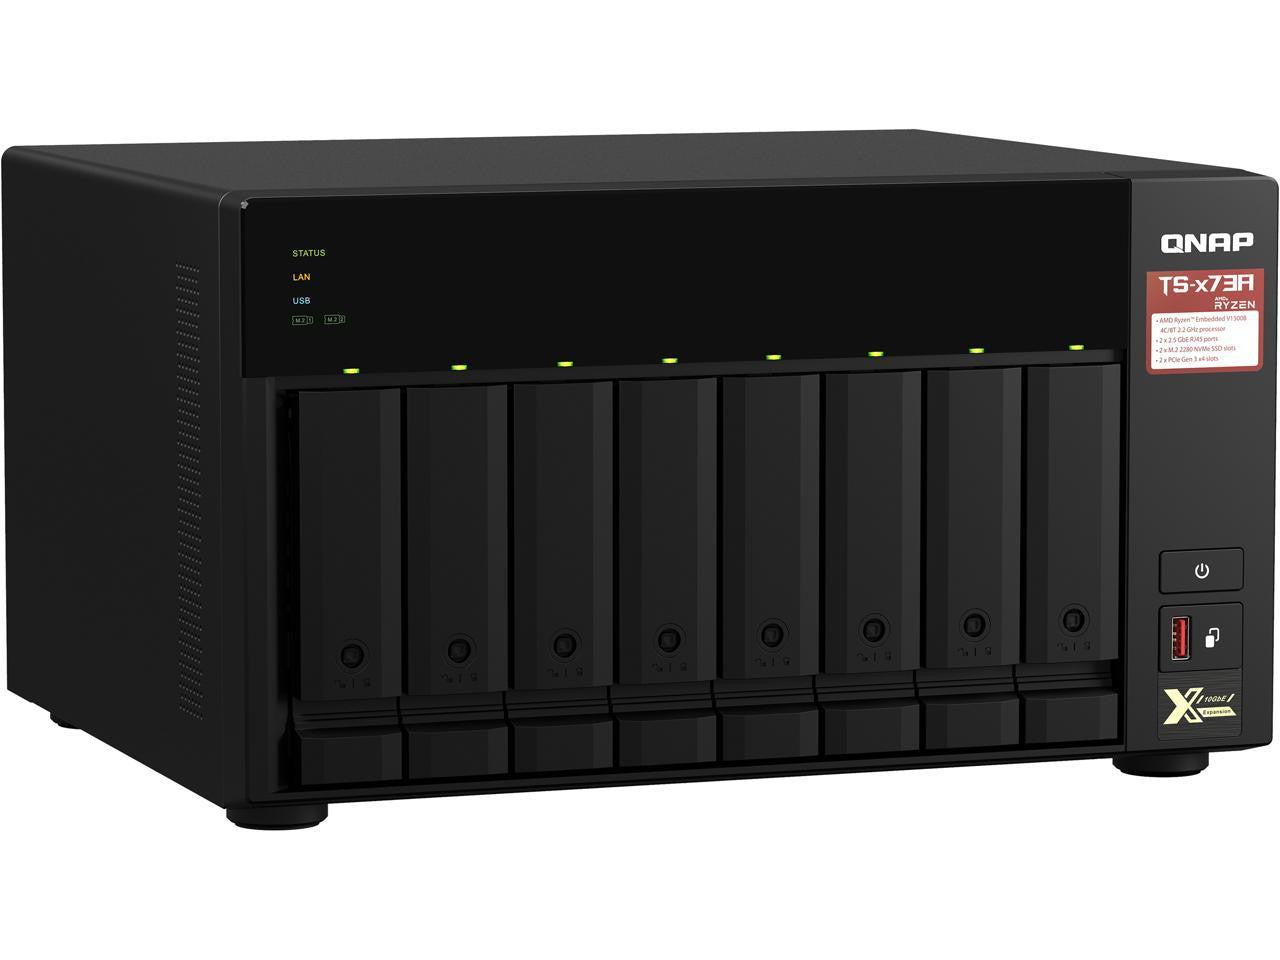 QNAP TS-873A 8-BAY NAS with 16GB DDR4 RAM and 96TB (8x12TB) Western Digital RED PLUS Drives Fully Assembled and Tested